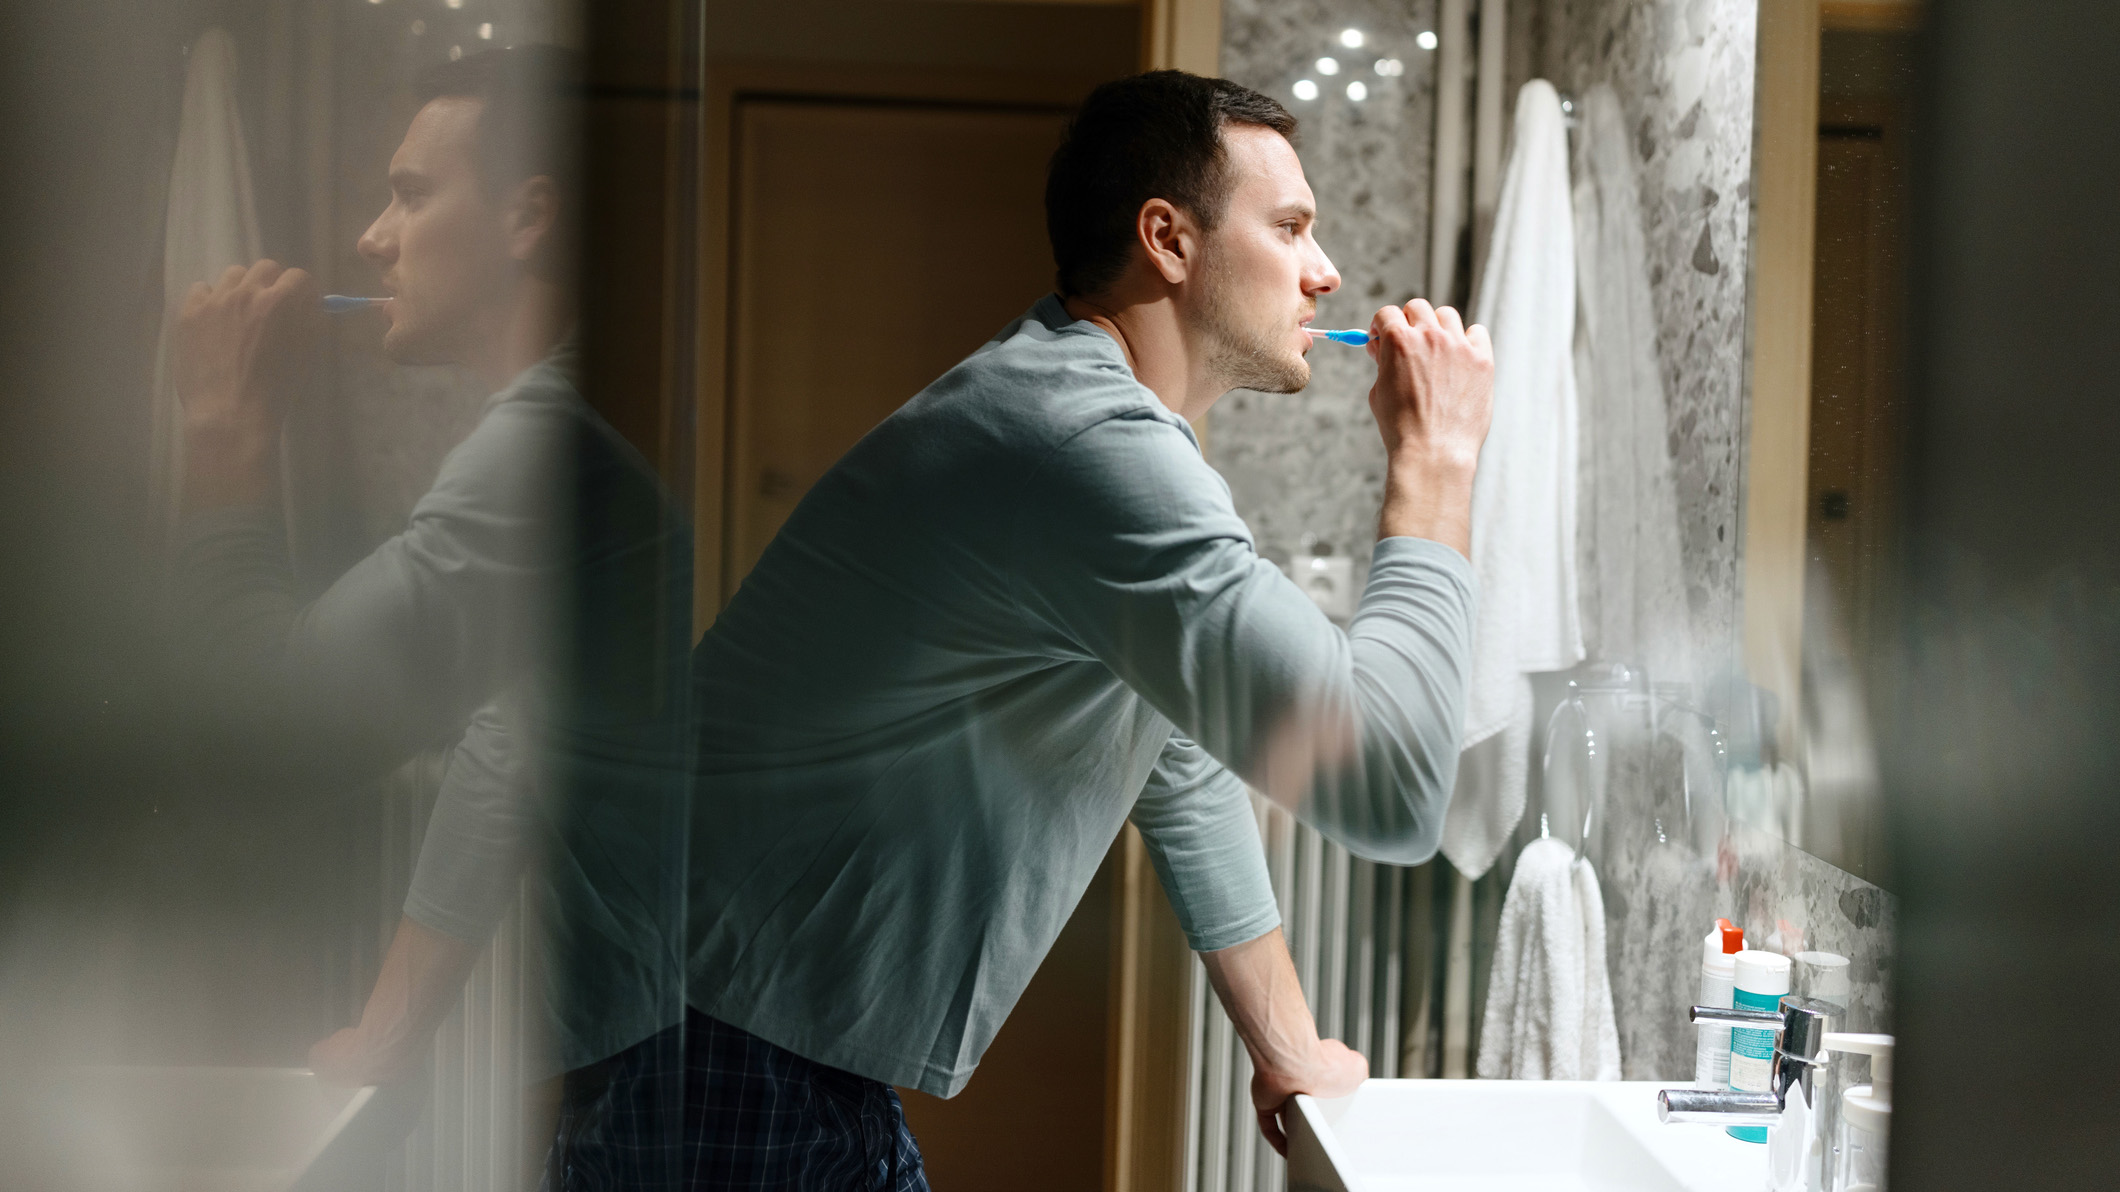 A dark haired man in a blue shirt brushes his teeth before going to bed